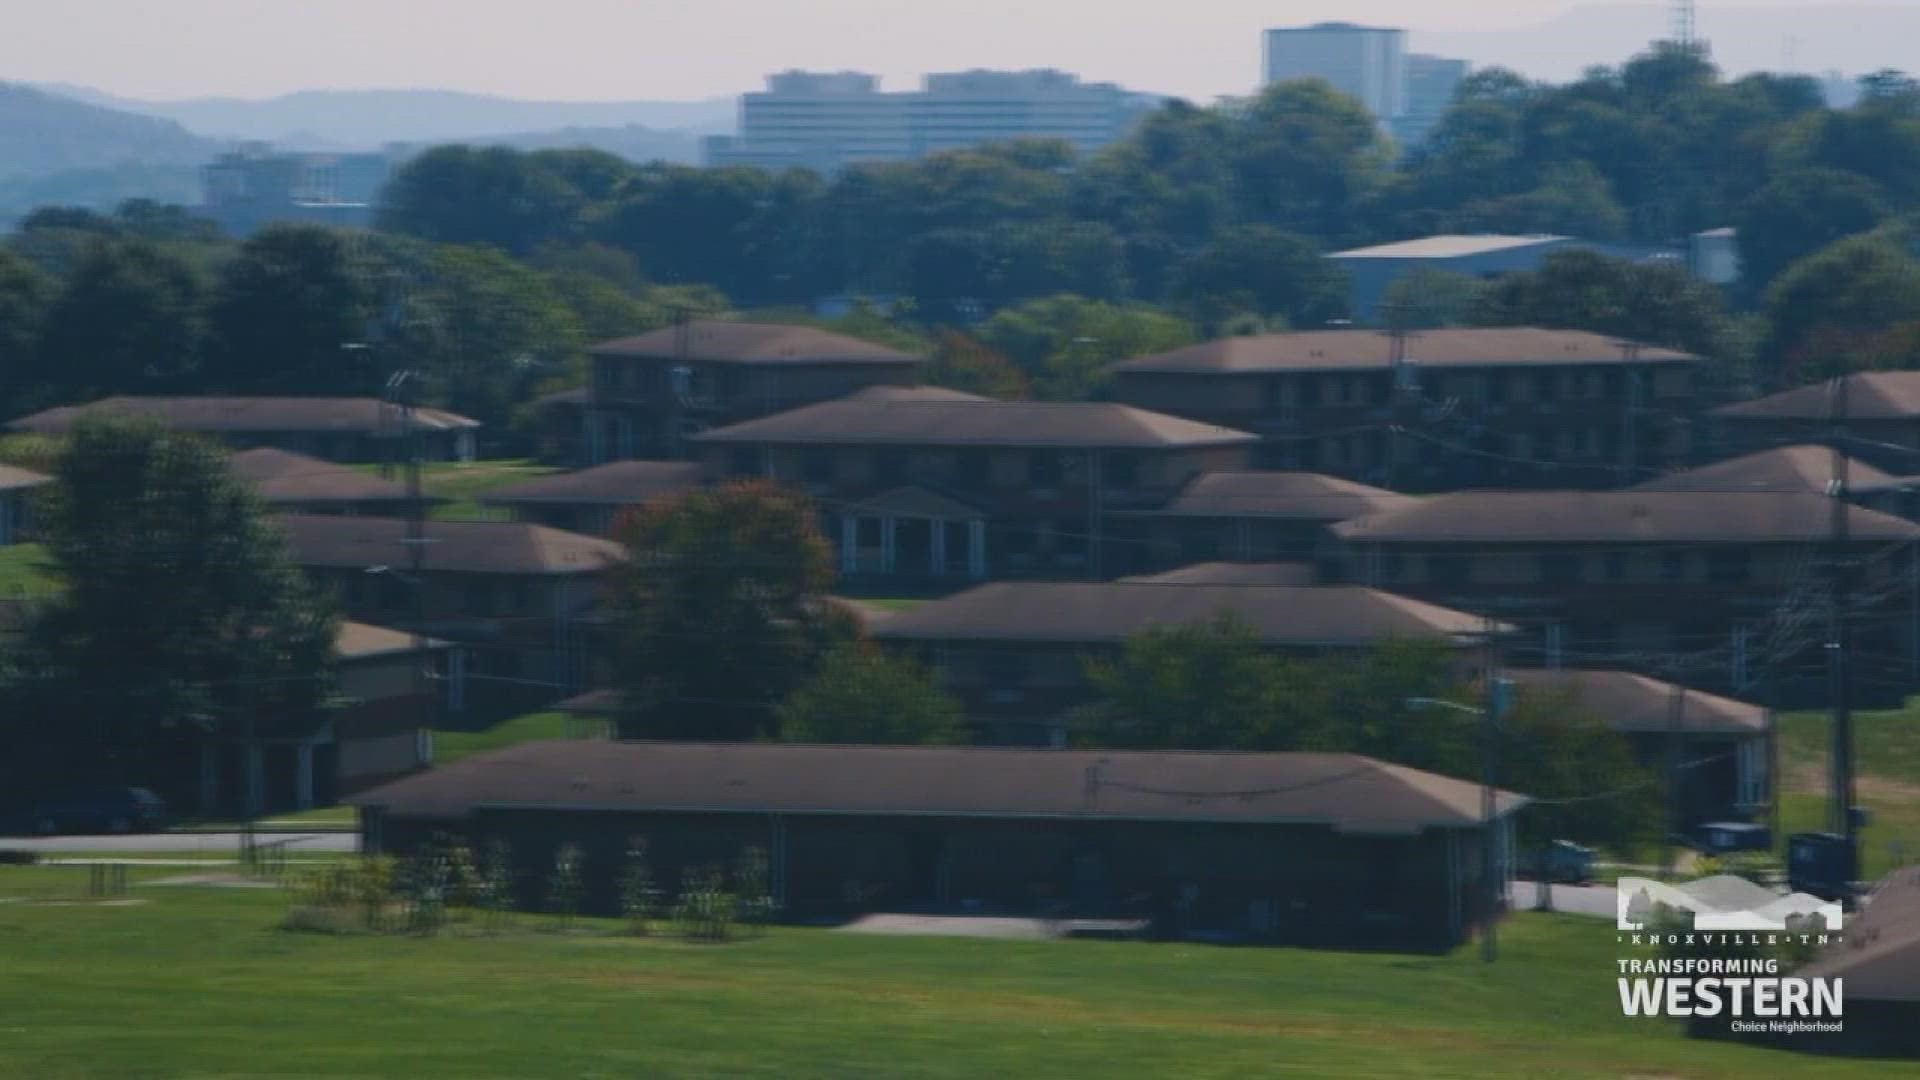 Knoxville's Community Development Corporation said its Transforming Western Heights plan costs around $220 million and will result in more affordable housing.